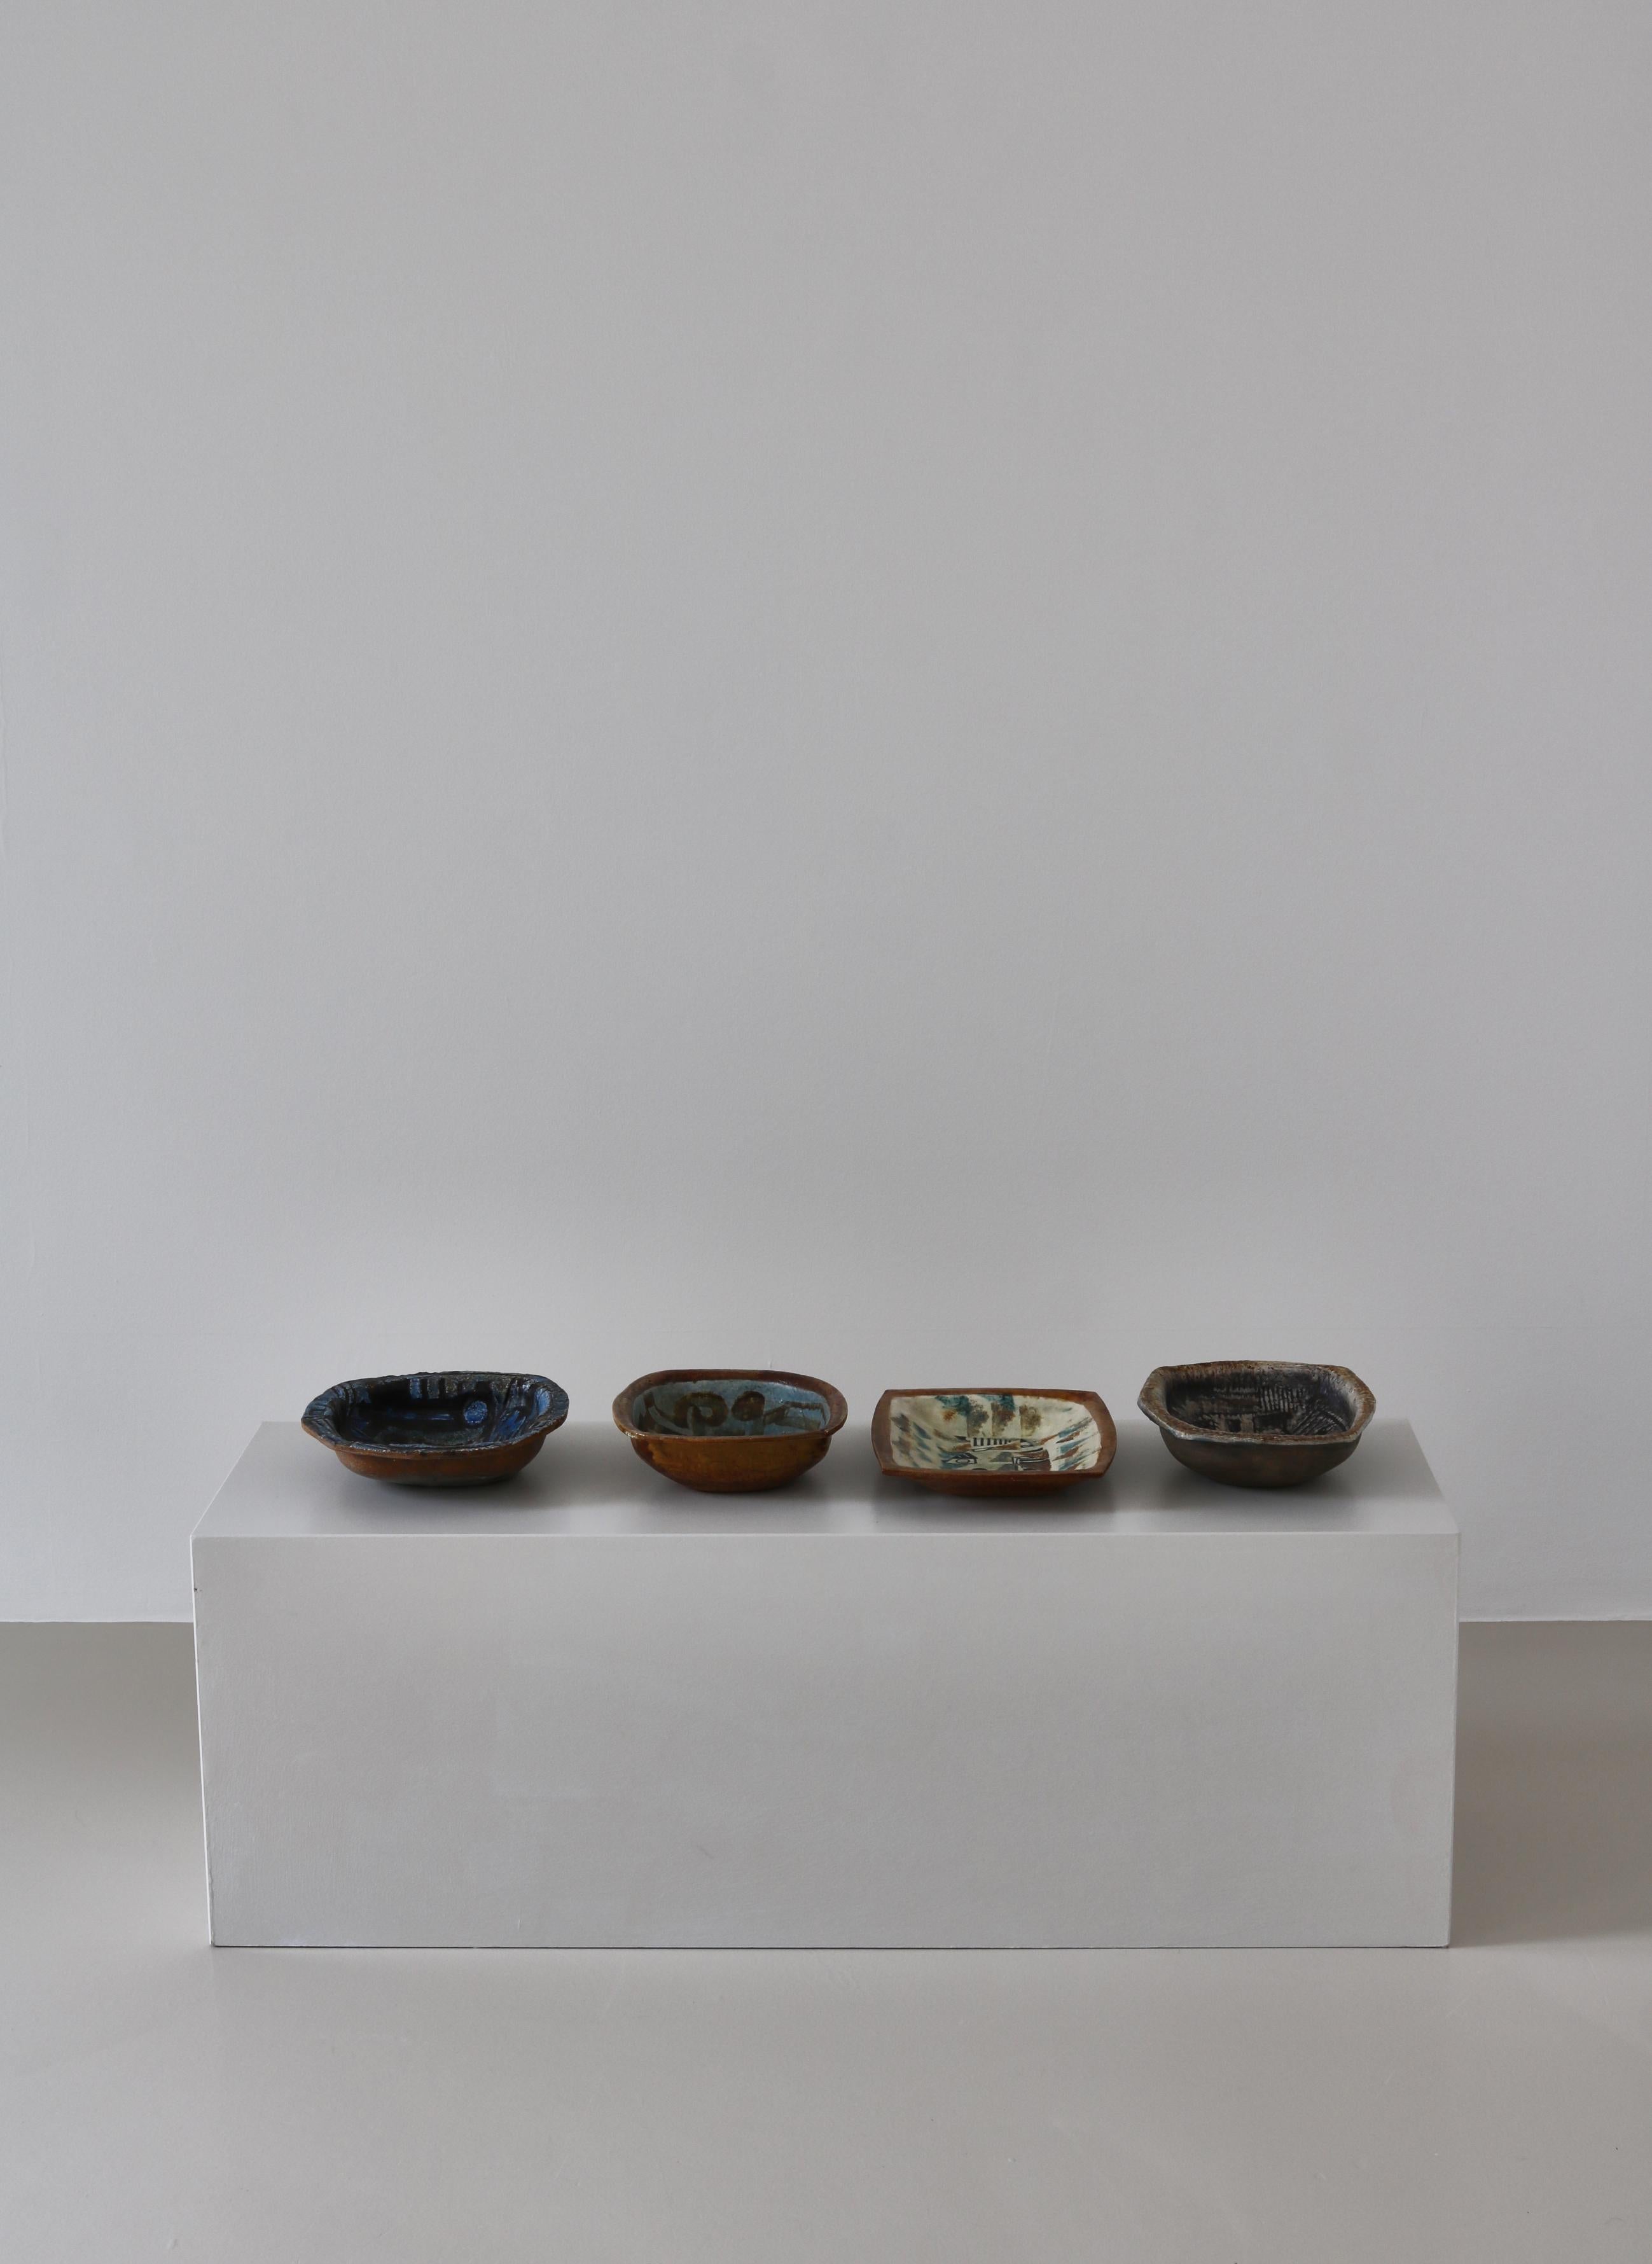 Danish Modern Group of Glazed Ceramics Bowls by Jeppe Hagedorn-Olsen, 1960s In Good Condition For Sale In Odense, DK